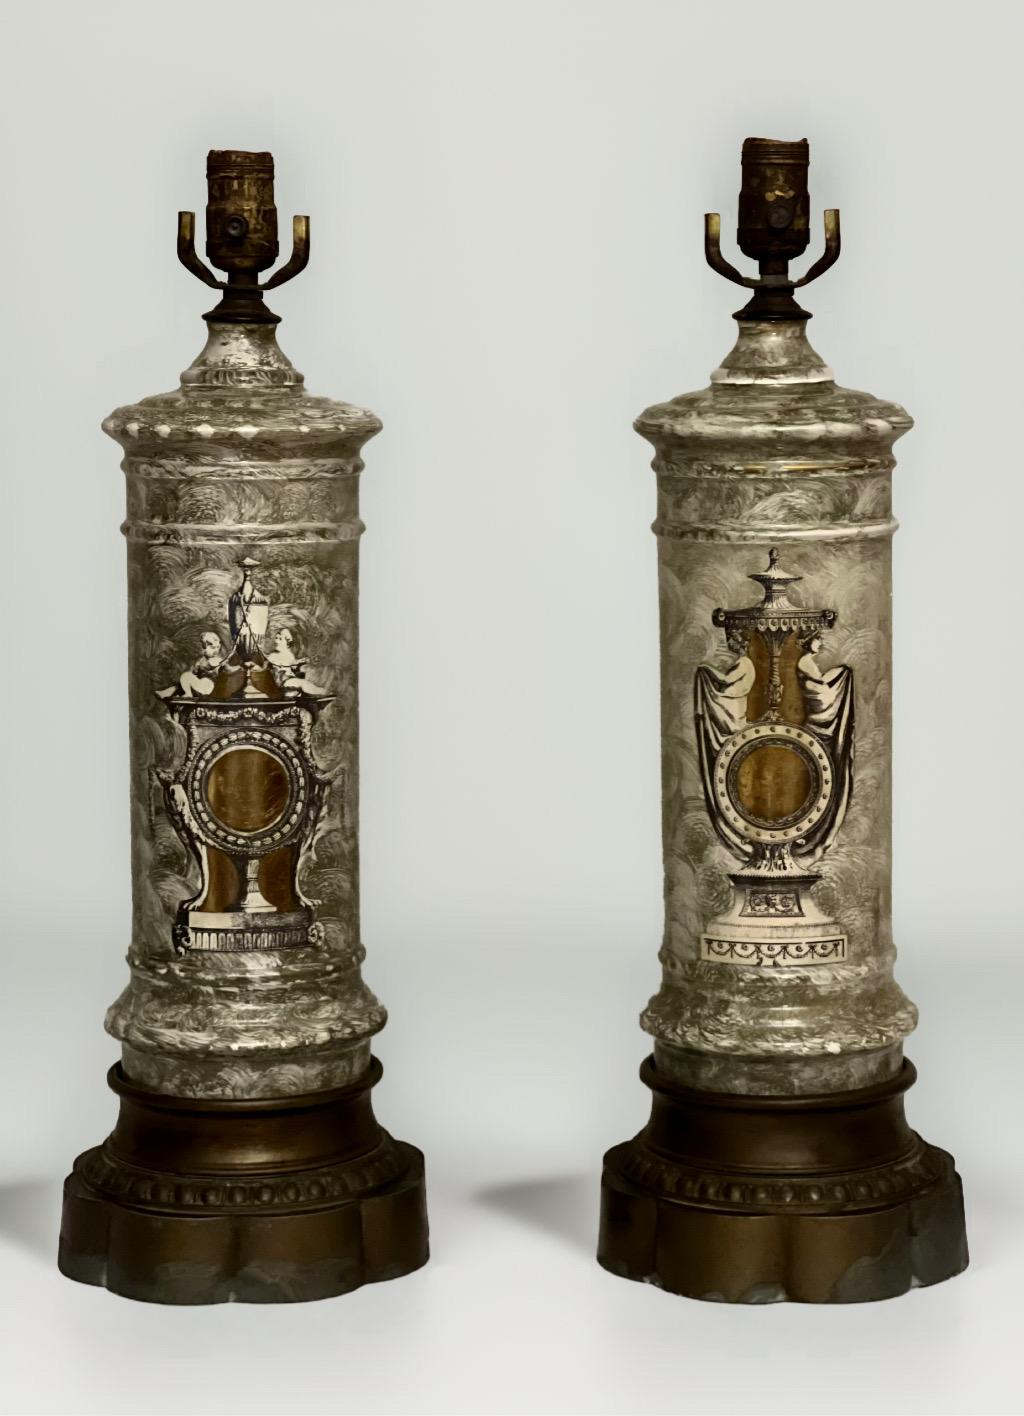 Pair of French Neoclassical style églomisé columnar lamps, c. 1910-1920.

Gorgeous pair of table lamps in églomisé with two coordinating designs. One features cherub-like figures, the other maidens in classic draped attire, both resting upon